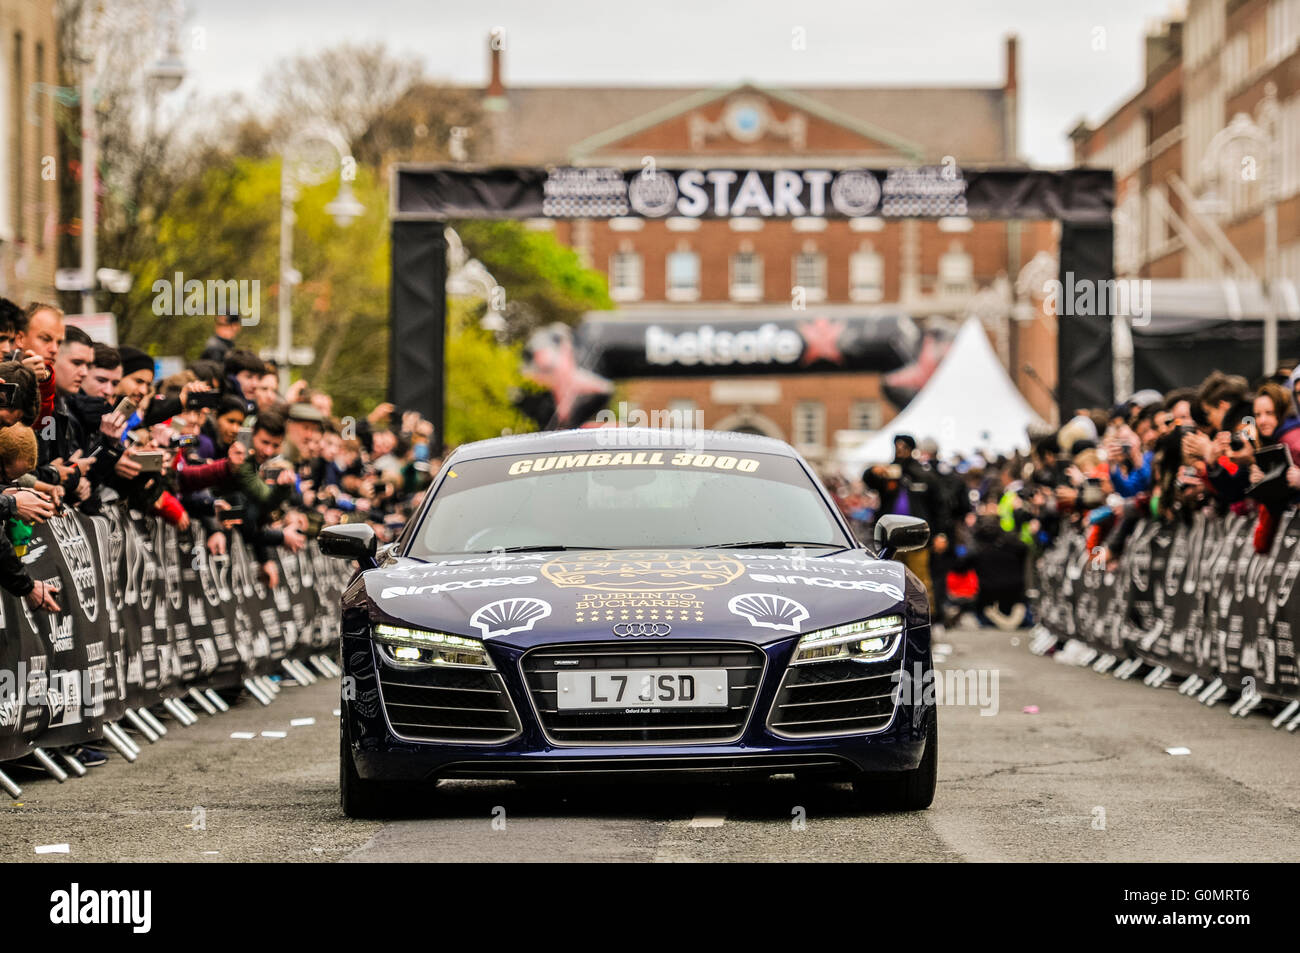 DUBLIN, IRELAND. MAY 01 2016 - An Audi R8 Quattro leaves at the start of the Gumball 3000 to Bucharest Stock Photo